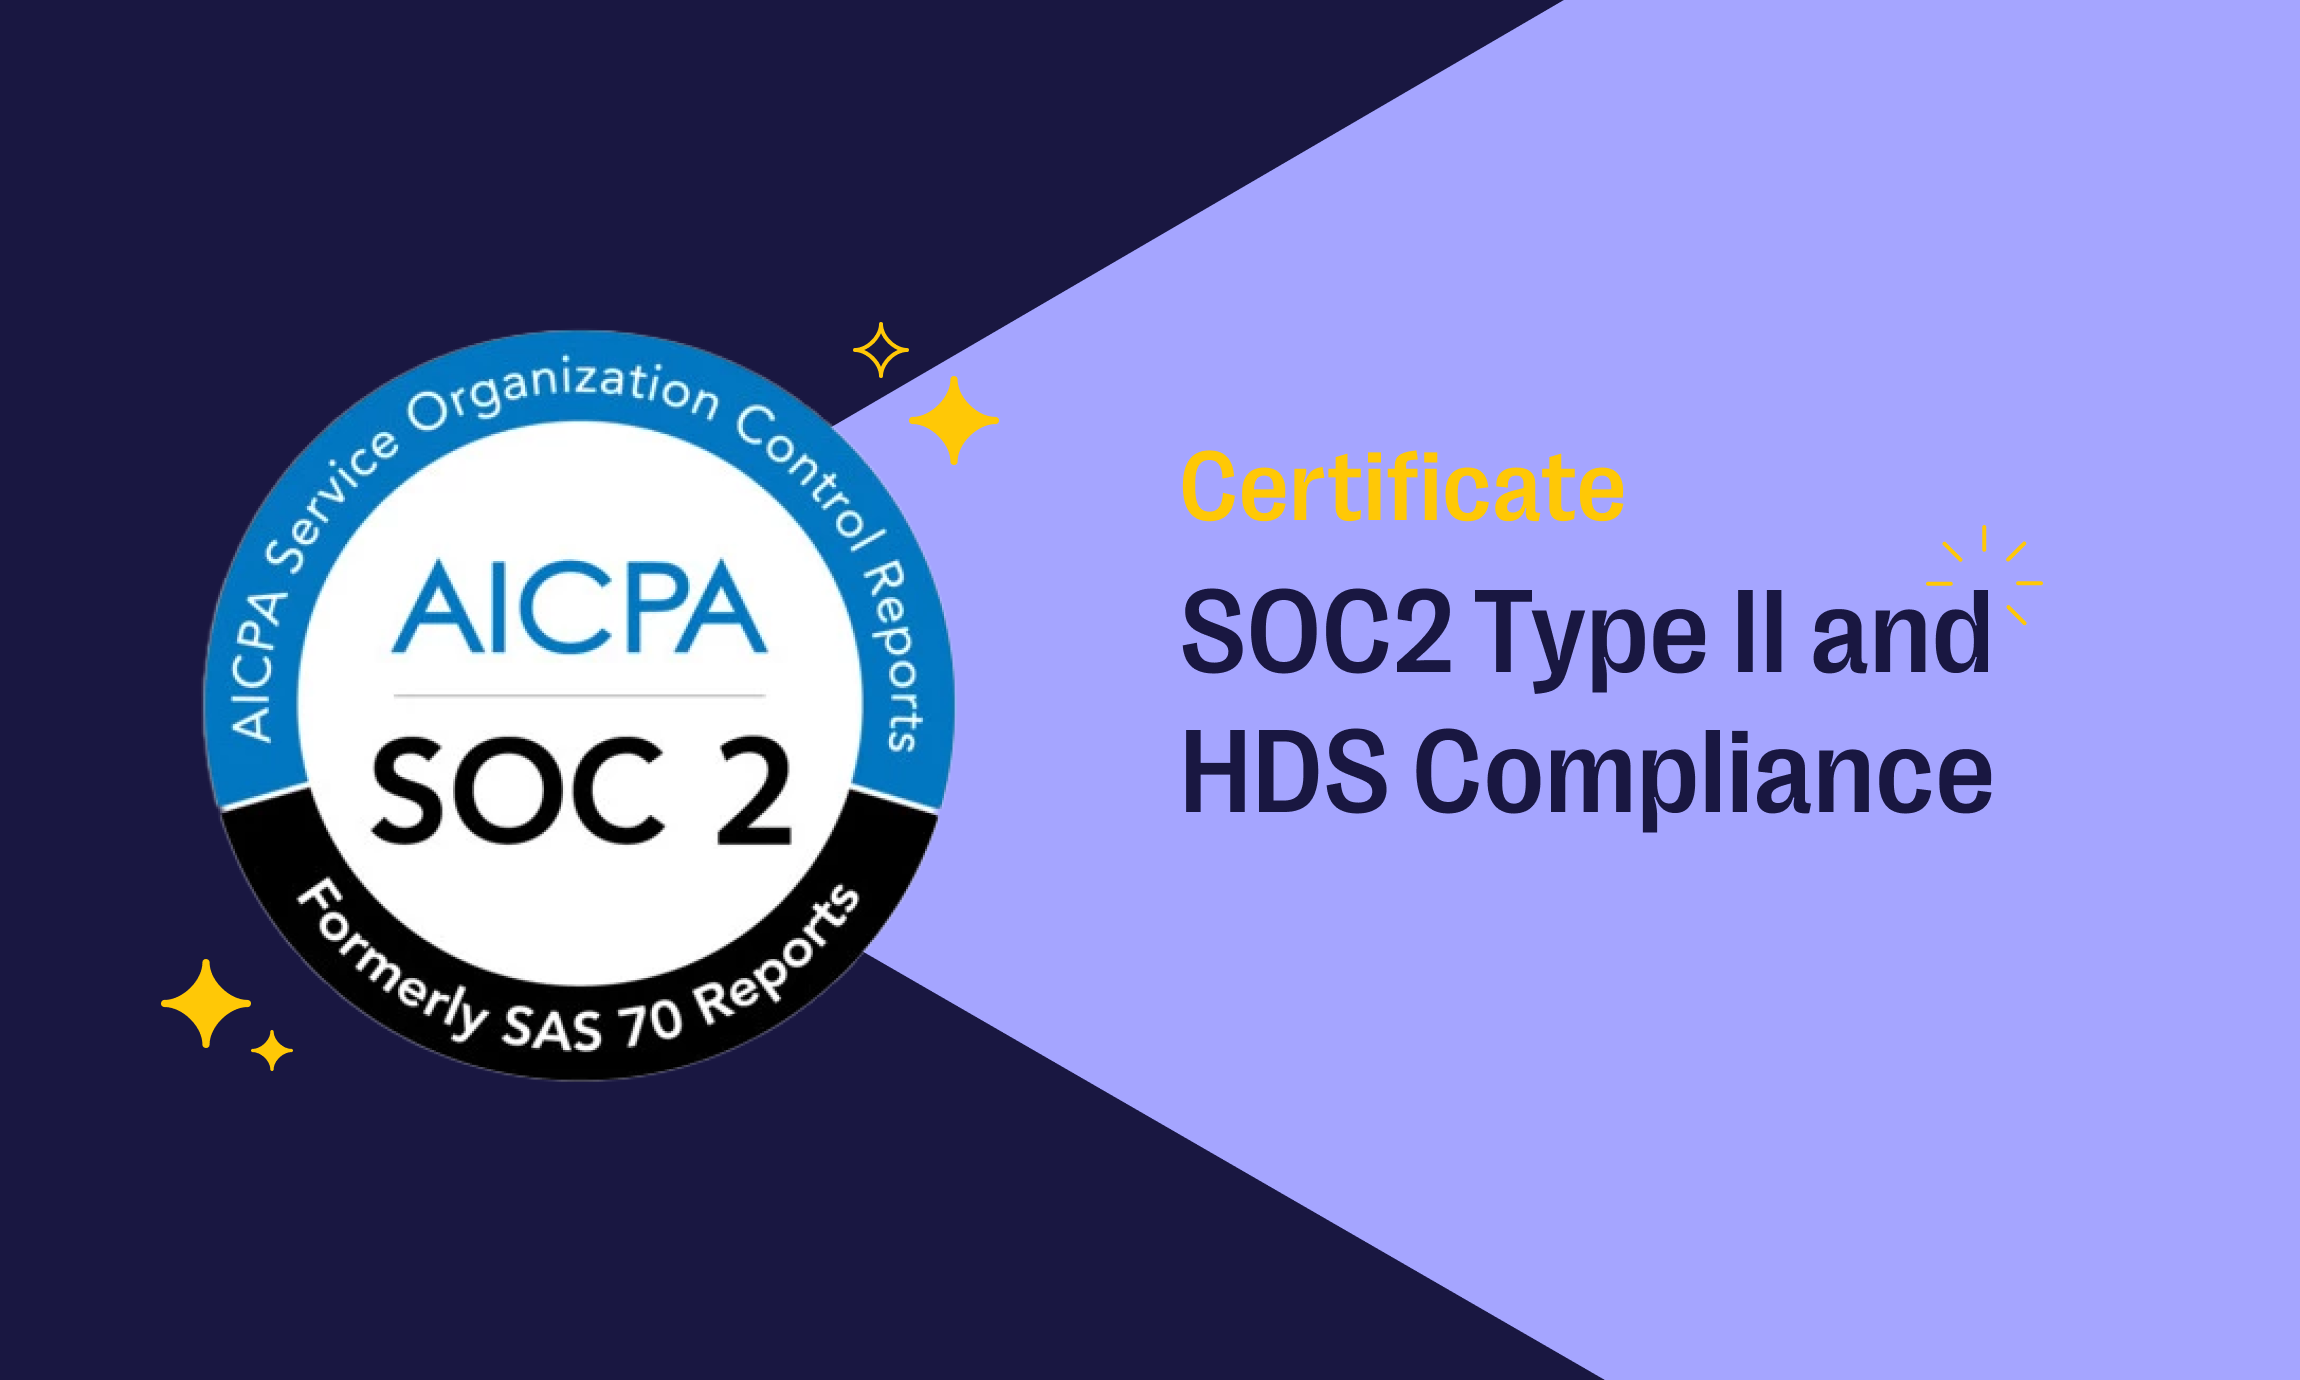 commercetools Announces SOC2 Type II and HDS Compliance